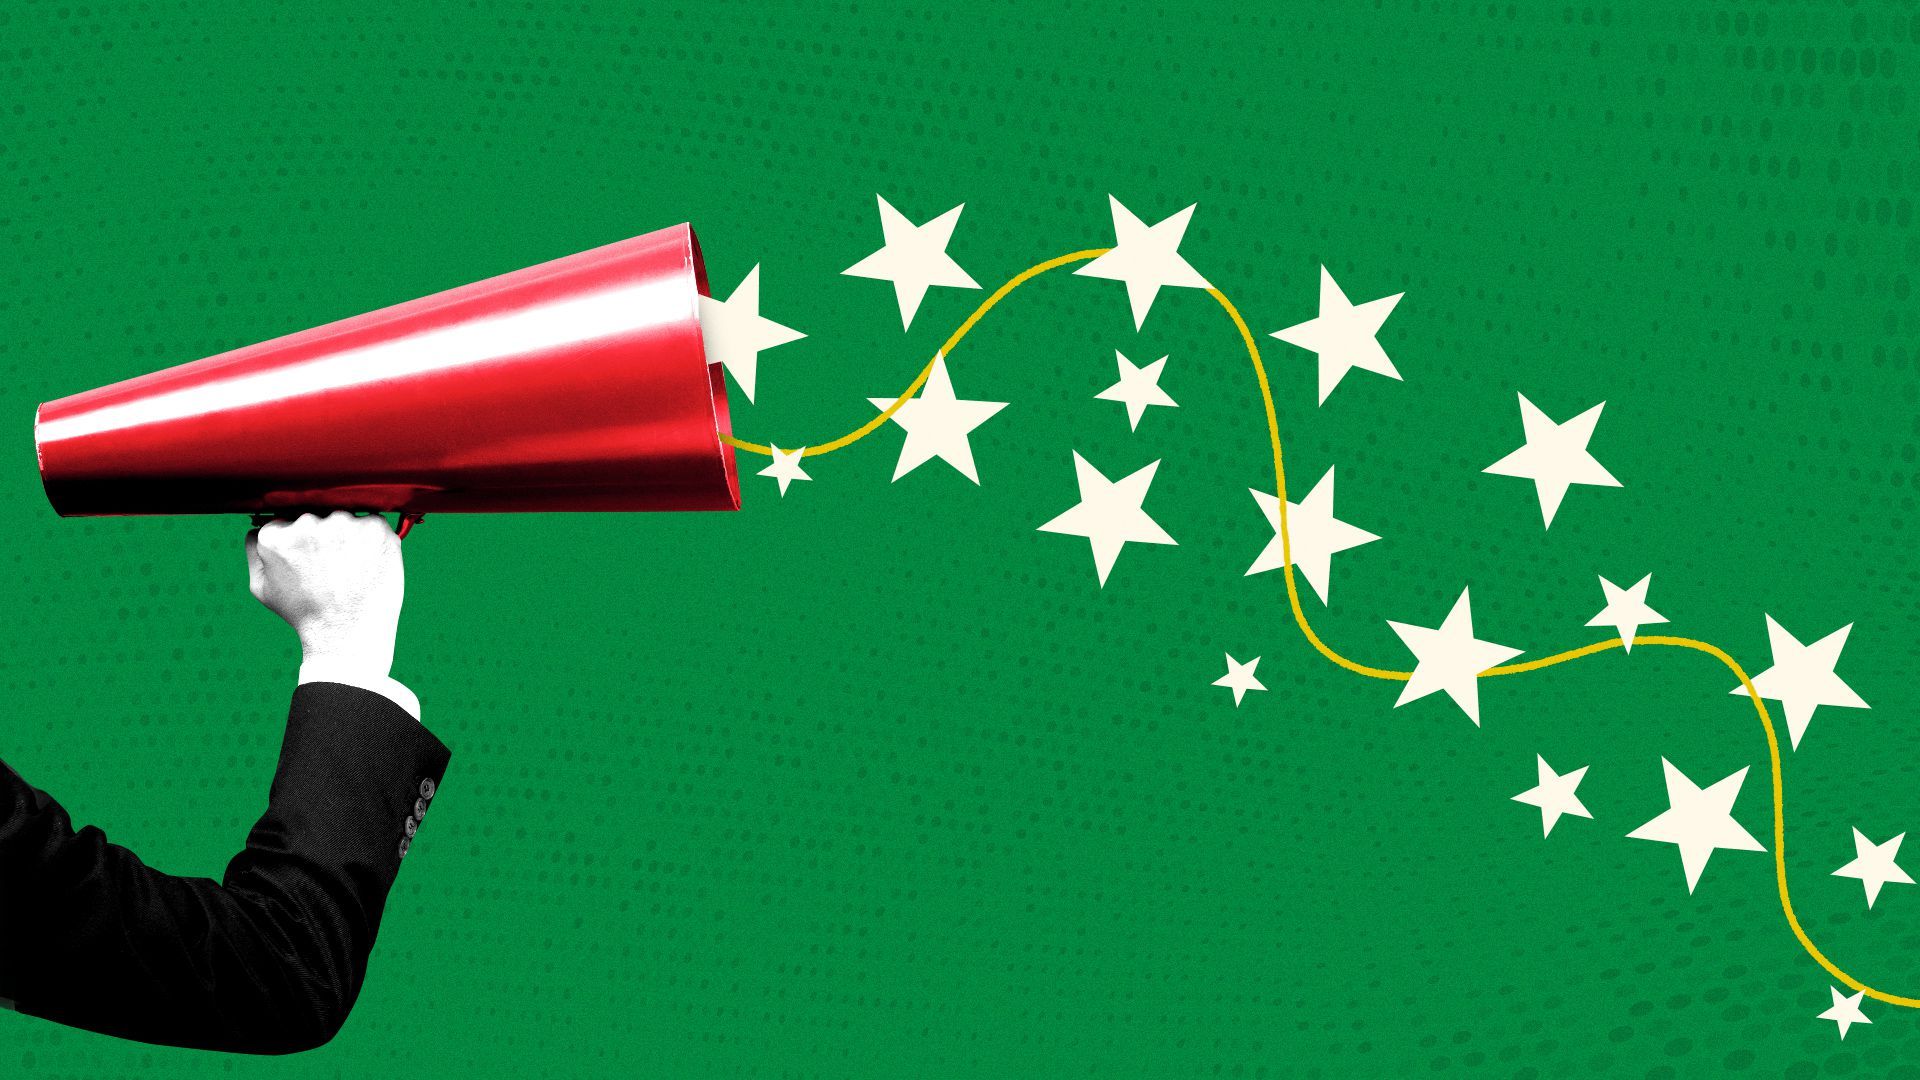 Illustration of a hand holding a megaphone with stars coming out. 